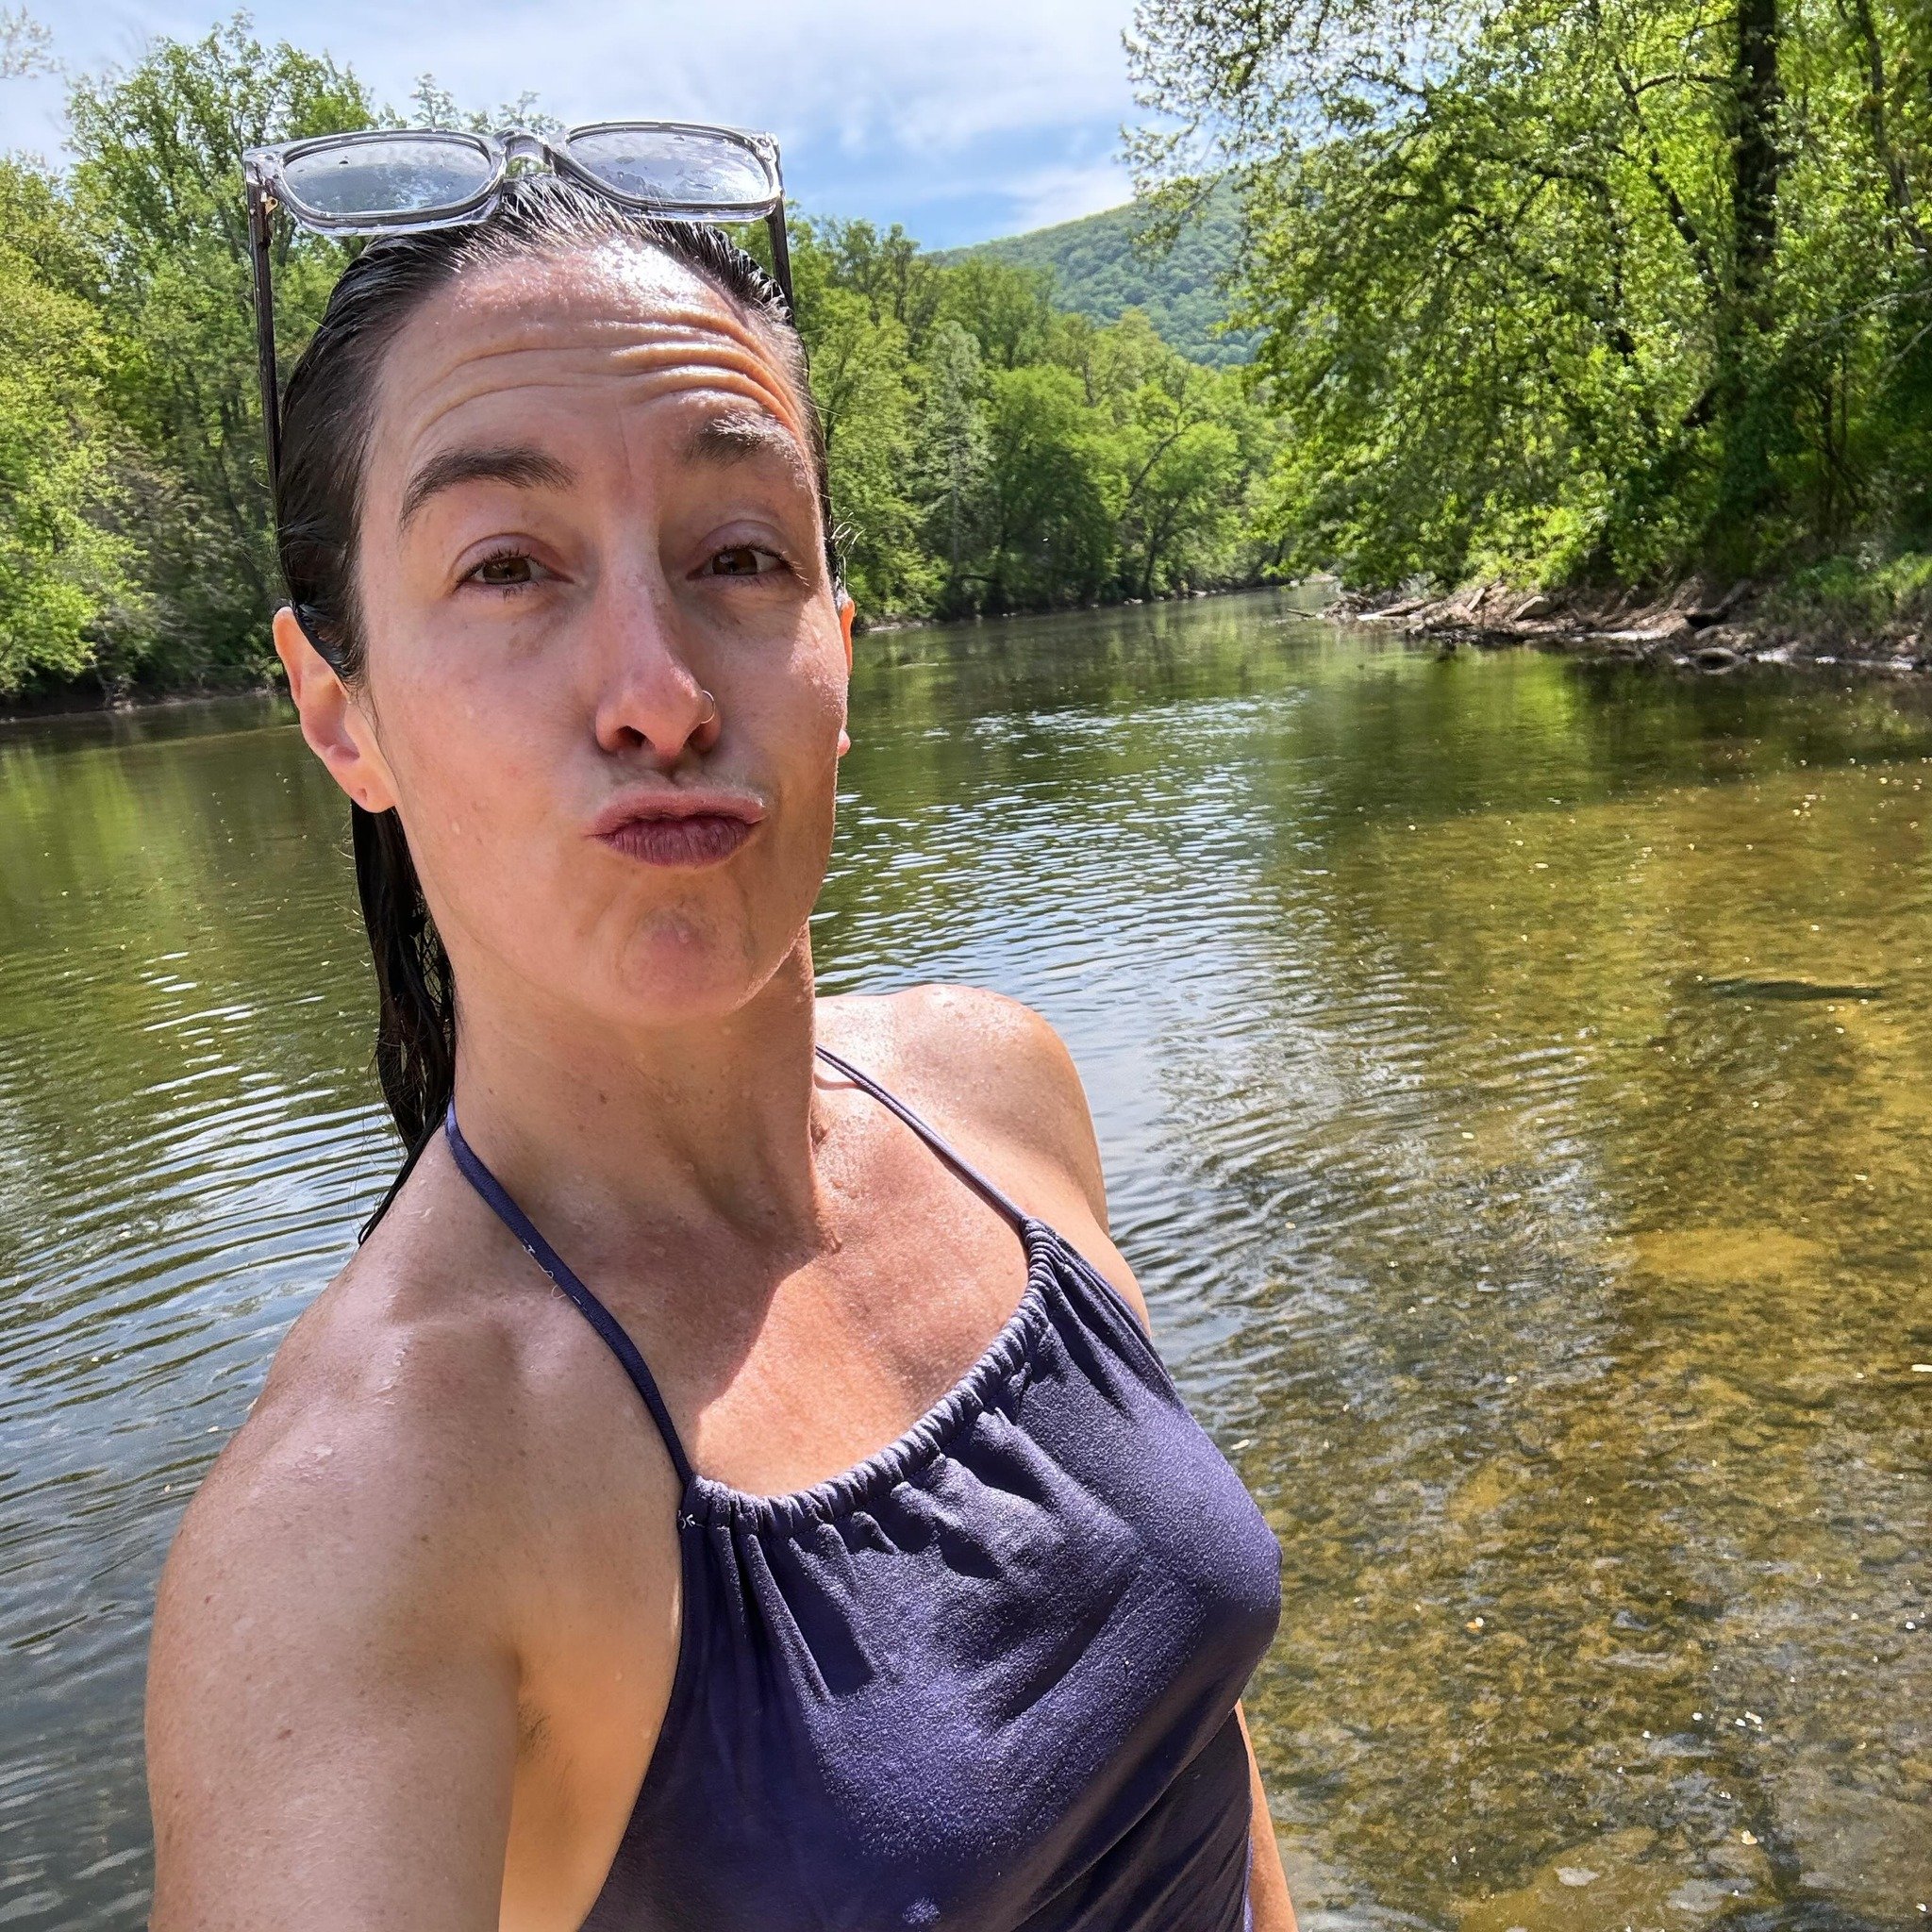 What calls you alive?!

Who &amp; what are catalysts for your aliveness?! How do you diversify the experiences of your daily living to prioritize relationships with those catalysts?

🌀
🌀
🌀

River dipping is a catalyst for me. It grounds me in the 